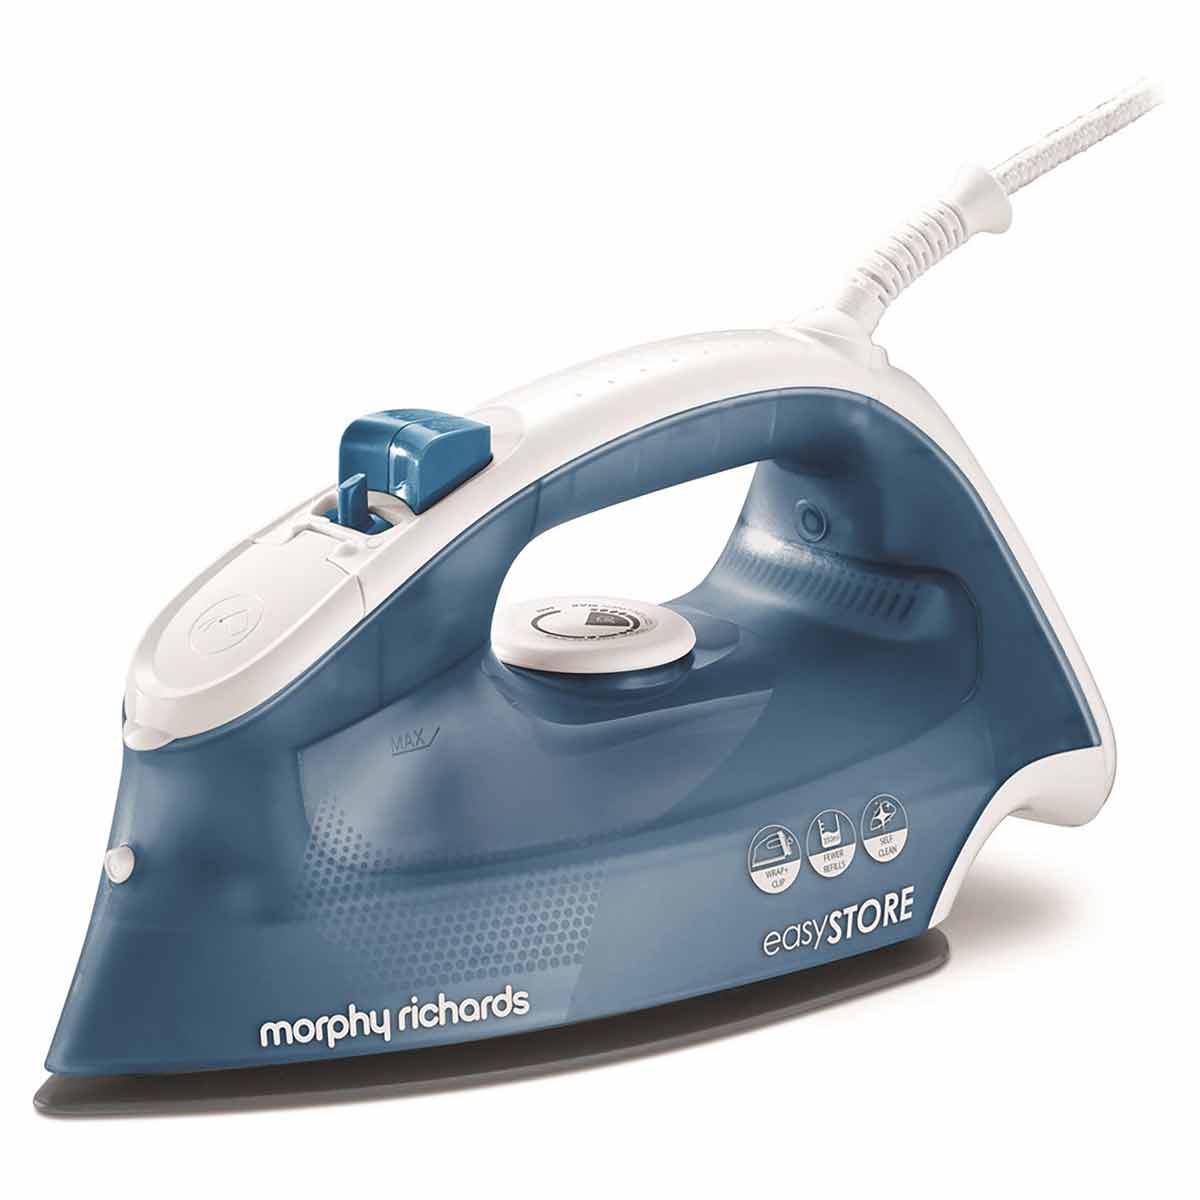 Morphy Richards 300283 Easy Store 2400W Steam Iron - Blue